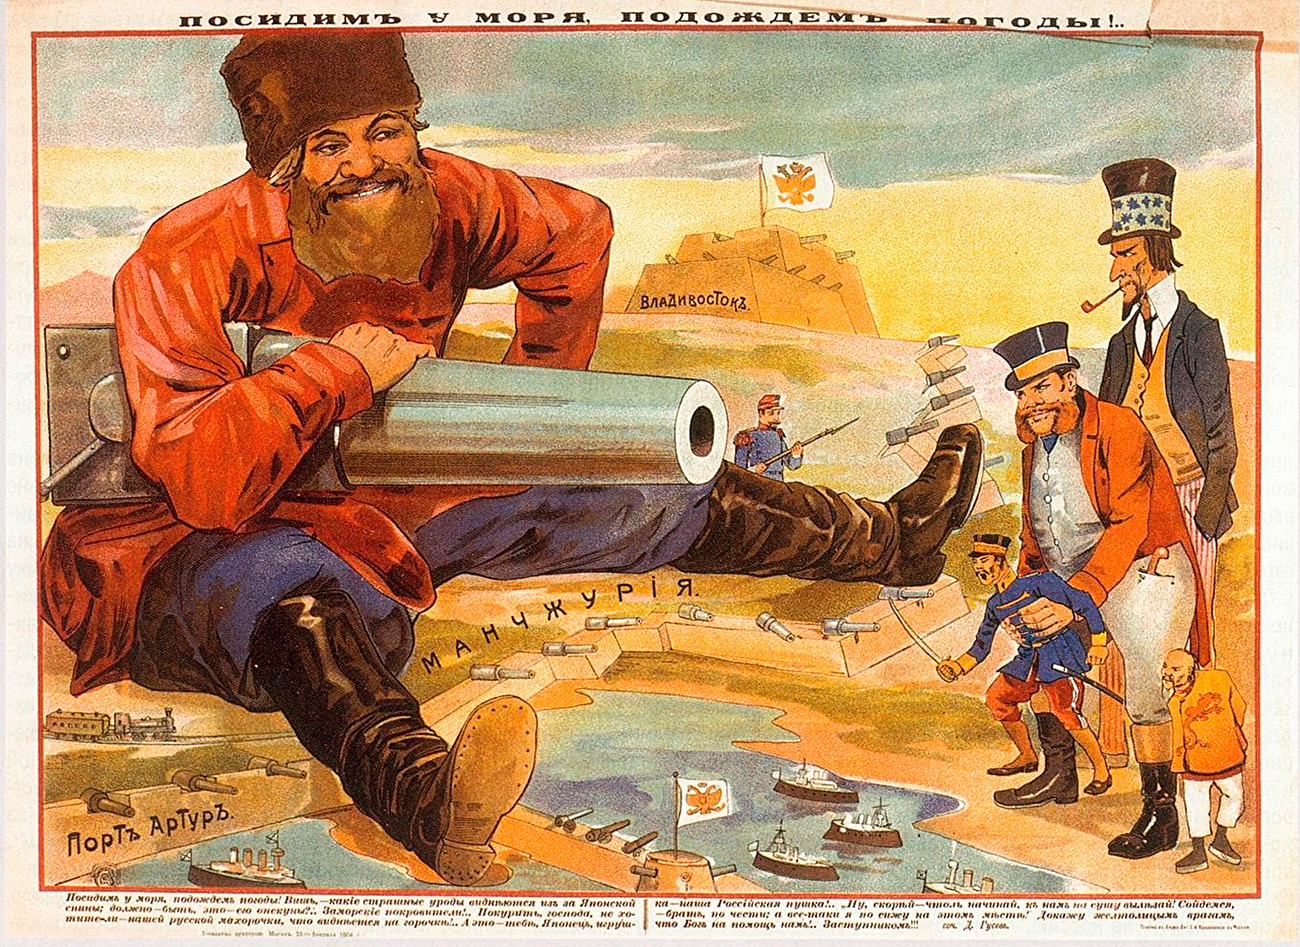 15 posters about the war Russia catastrophically lost - Russia Beyond